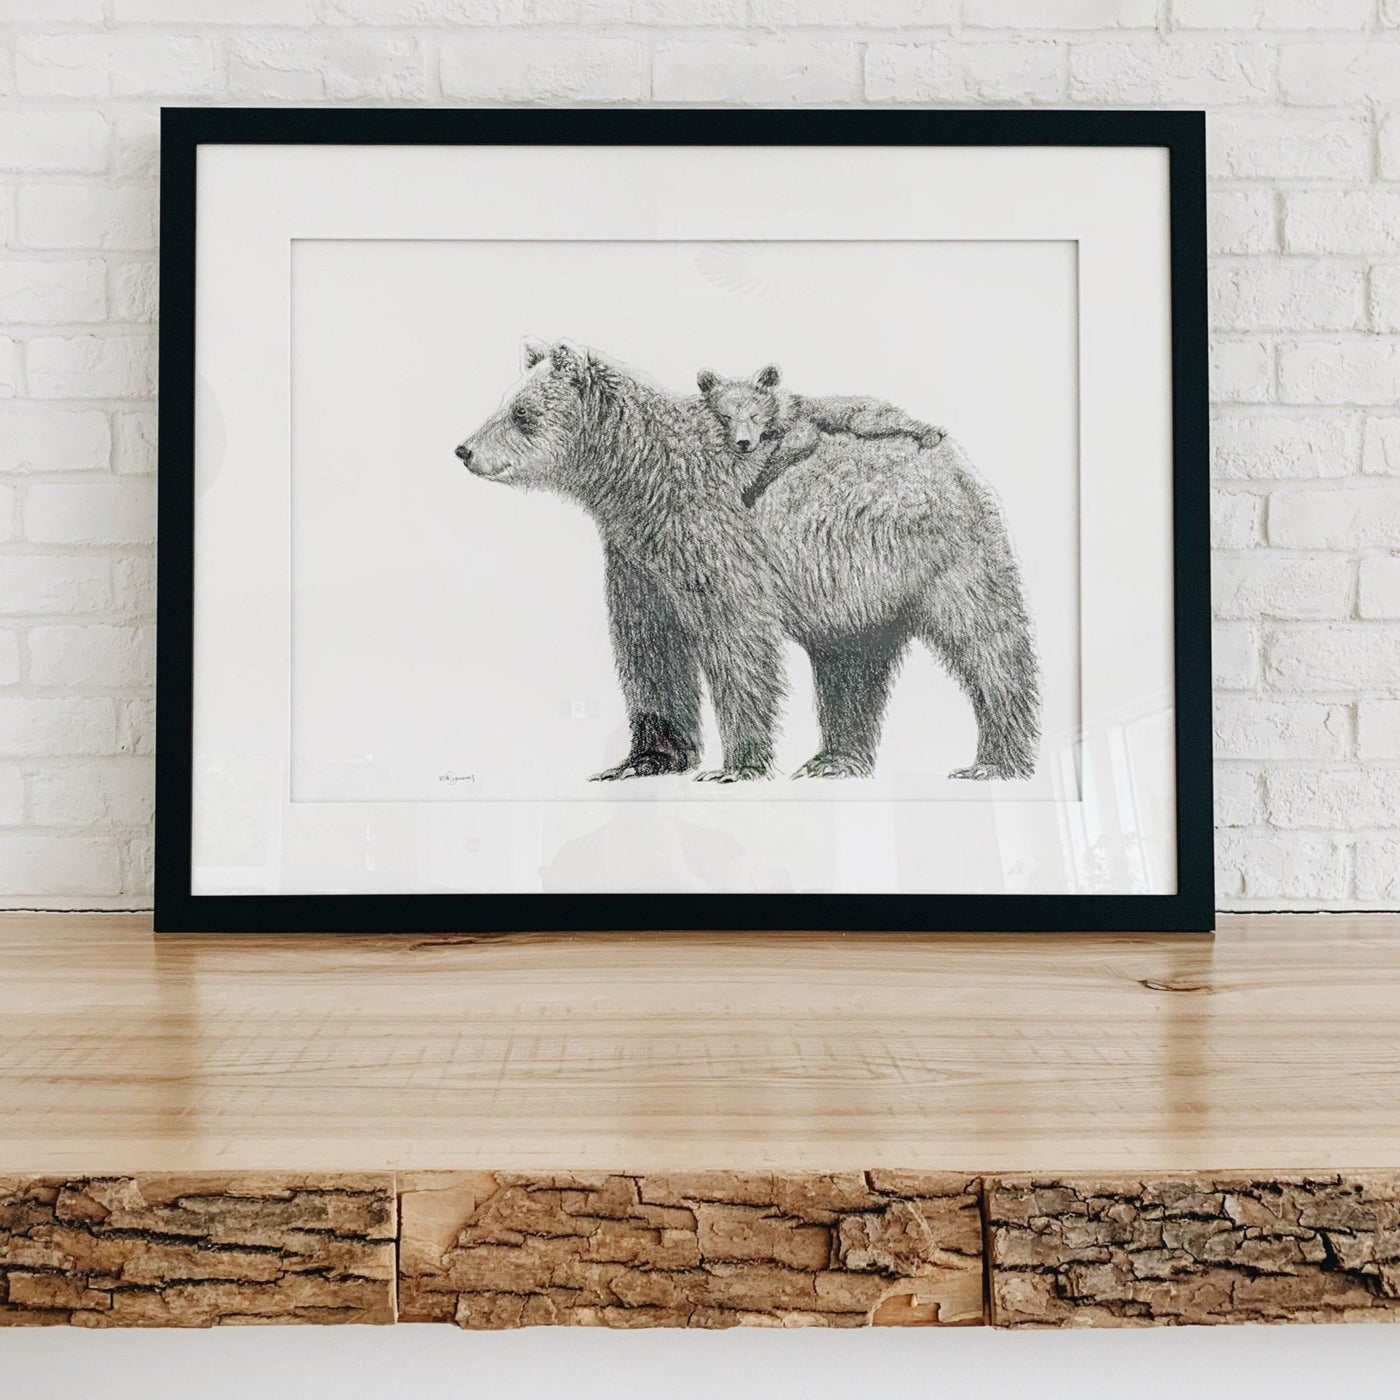 SOLD - Original Artwork - Mother Bear and cub - "Social Animal" Collection - LE NID atelier